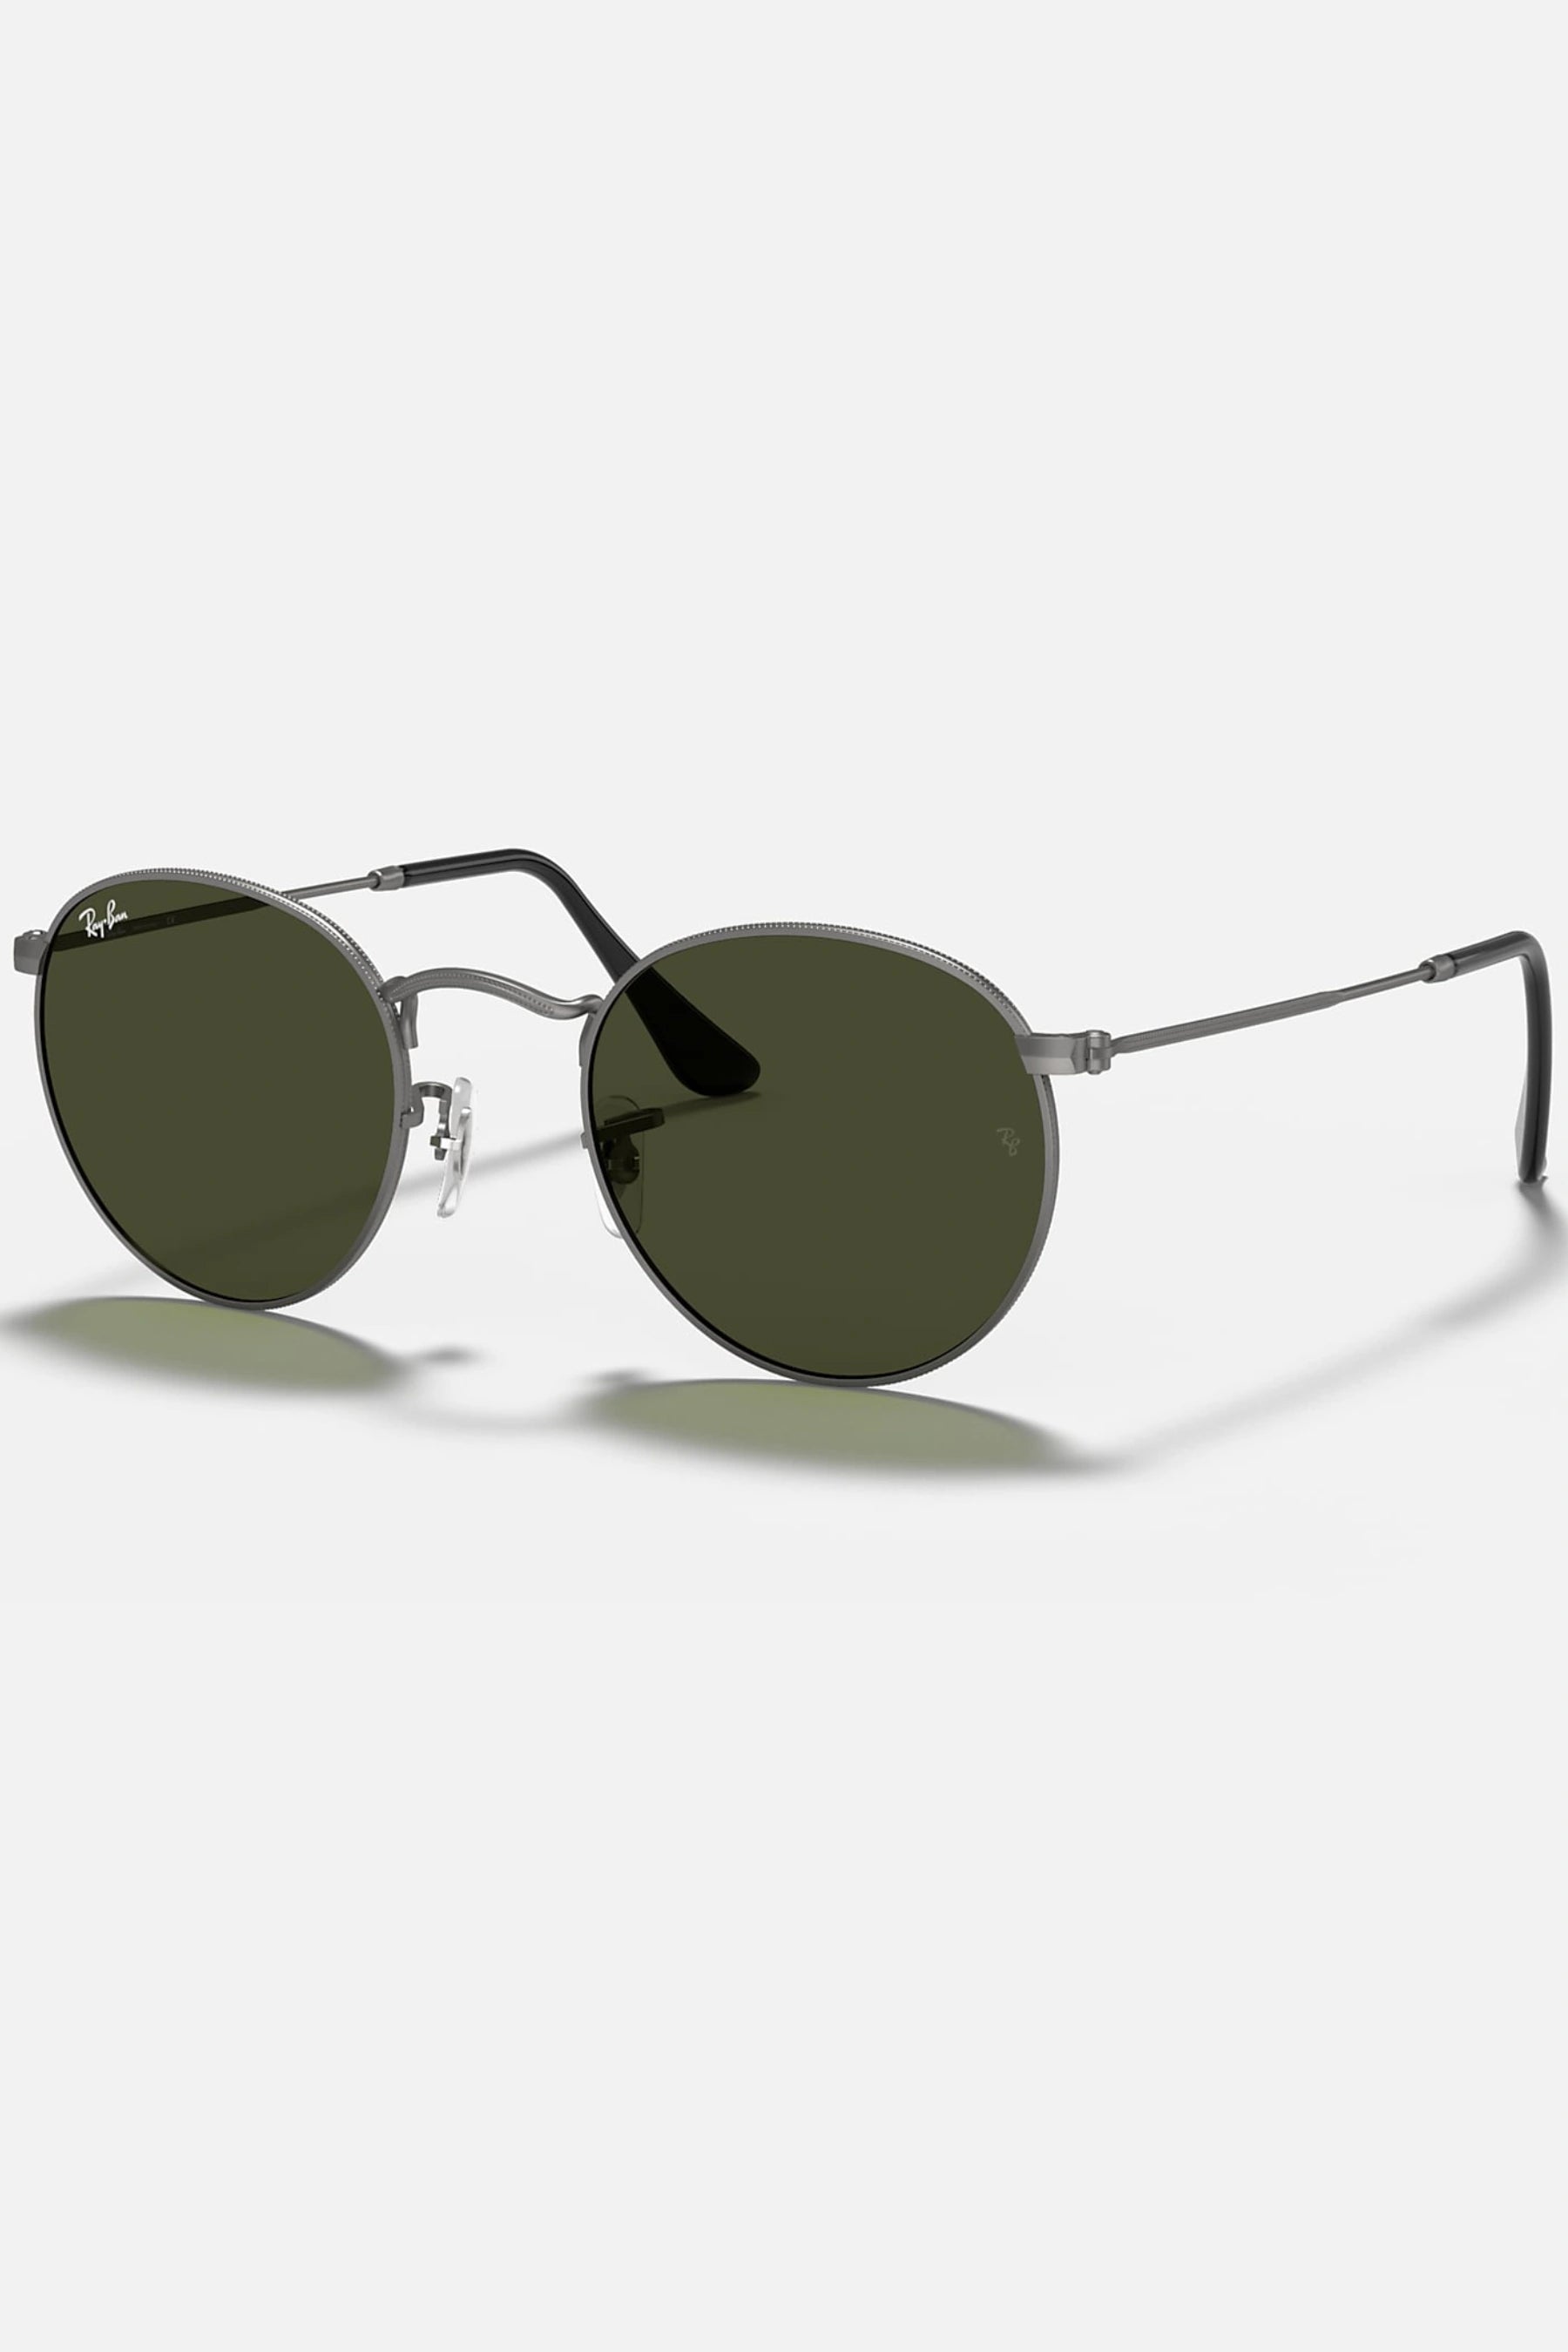 Ray-Ban RB3447 029 50 Round Metal